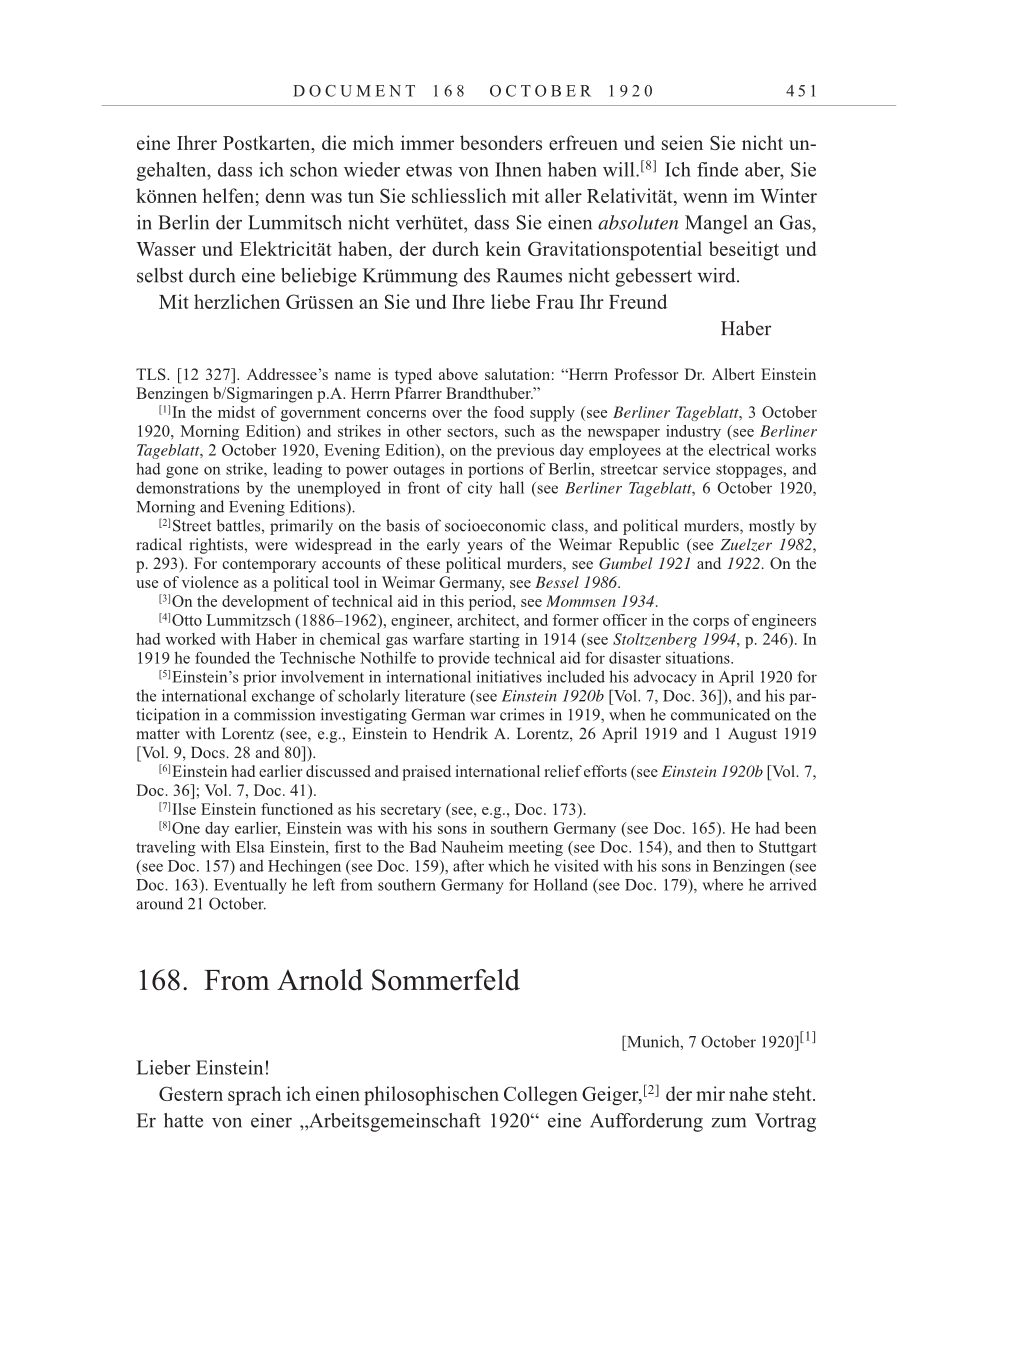 Volume 10: The Berlin Years: Correspondence May-December 1920 / Supplementary Correspondence 1909-1920 page 451